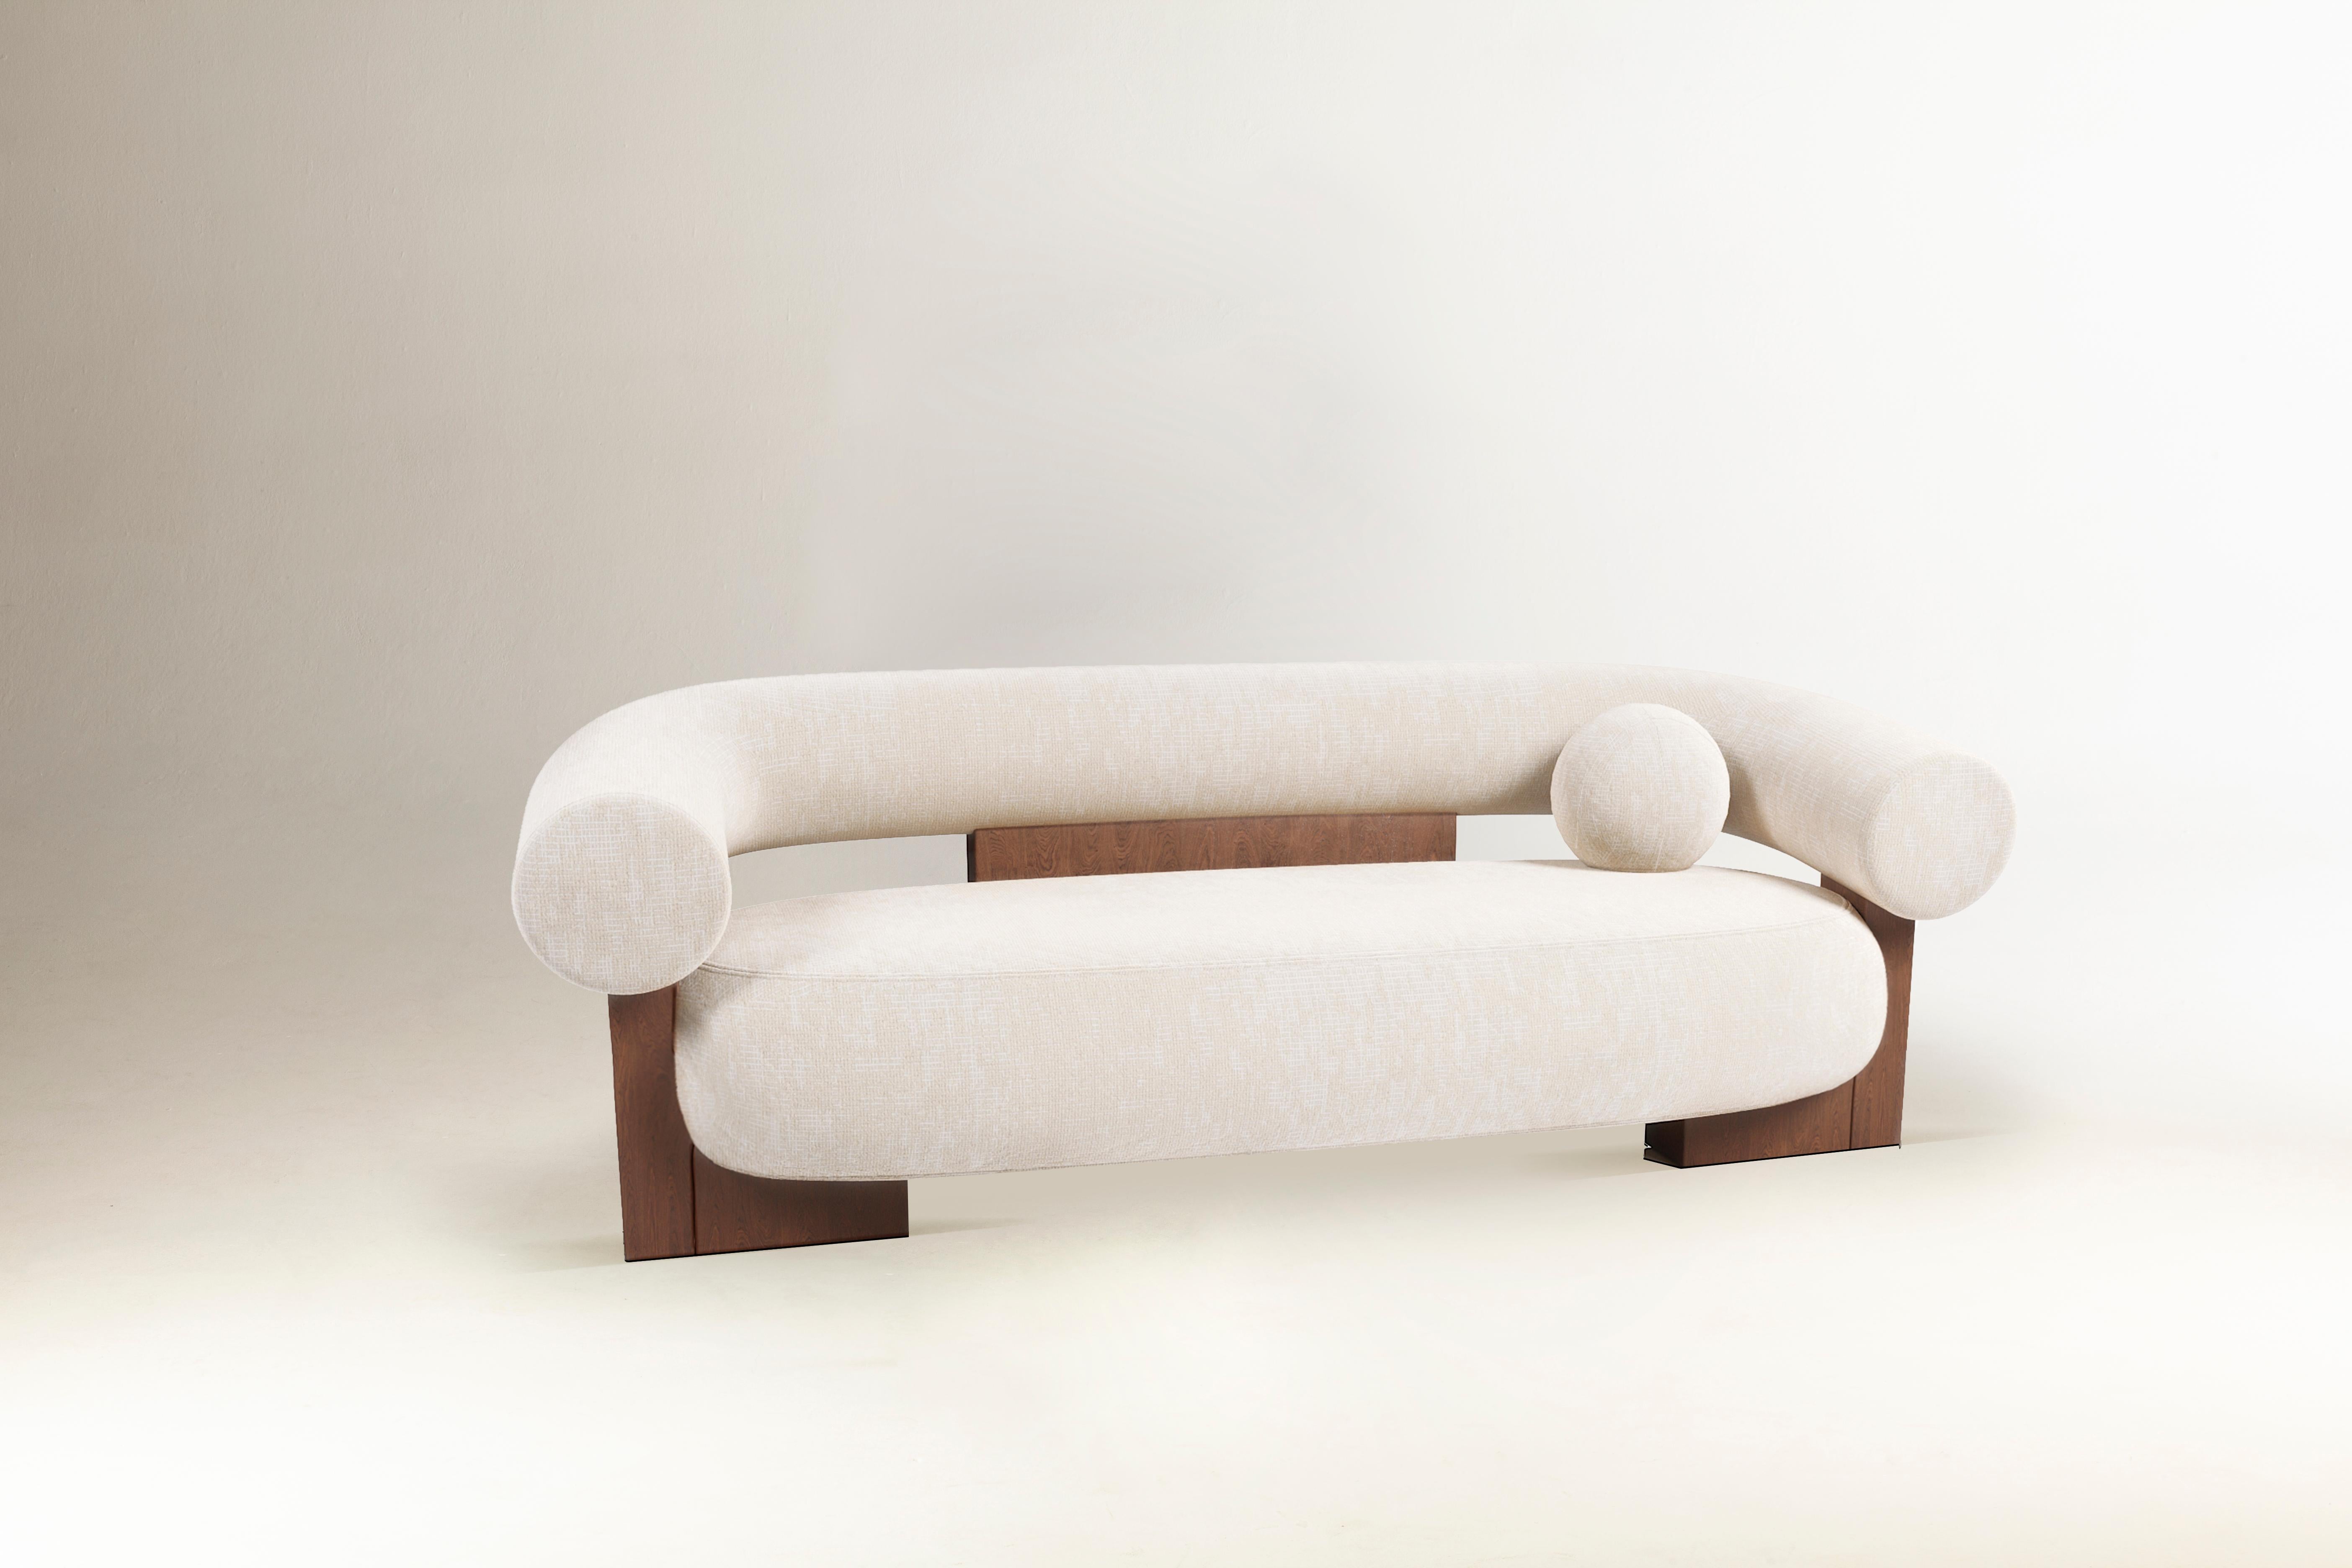 Unique Cassette sofa by Collector
Dimensions: W 235 x D 95 x H 77 cm
Materials: Fabric, Wood
Other materials available.

The Collector brand aims to be part of the daily life by fusing furniture to our home routine and lifestyle, that’s why